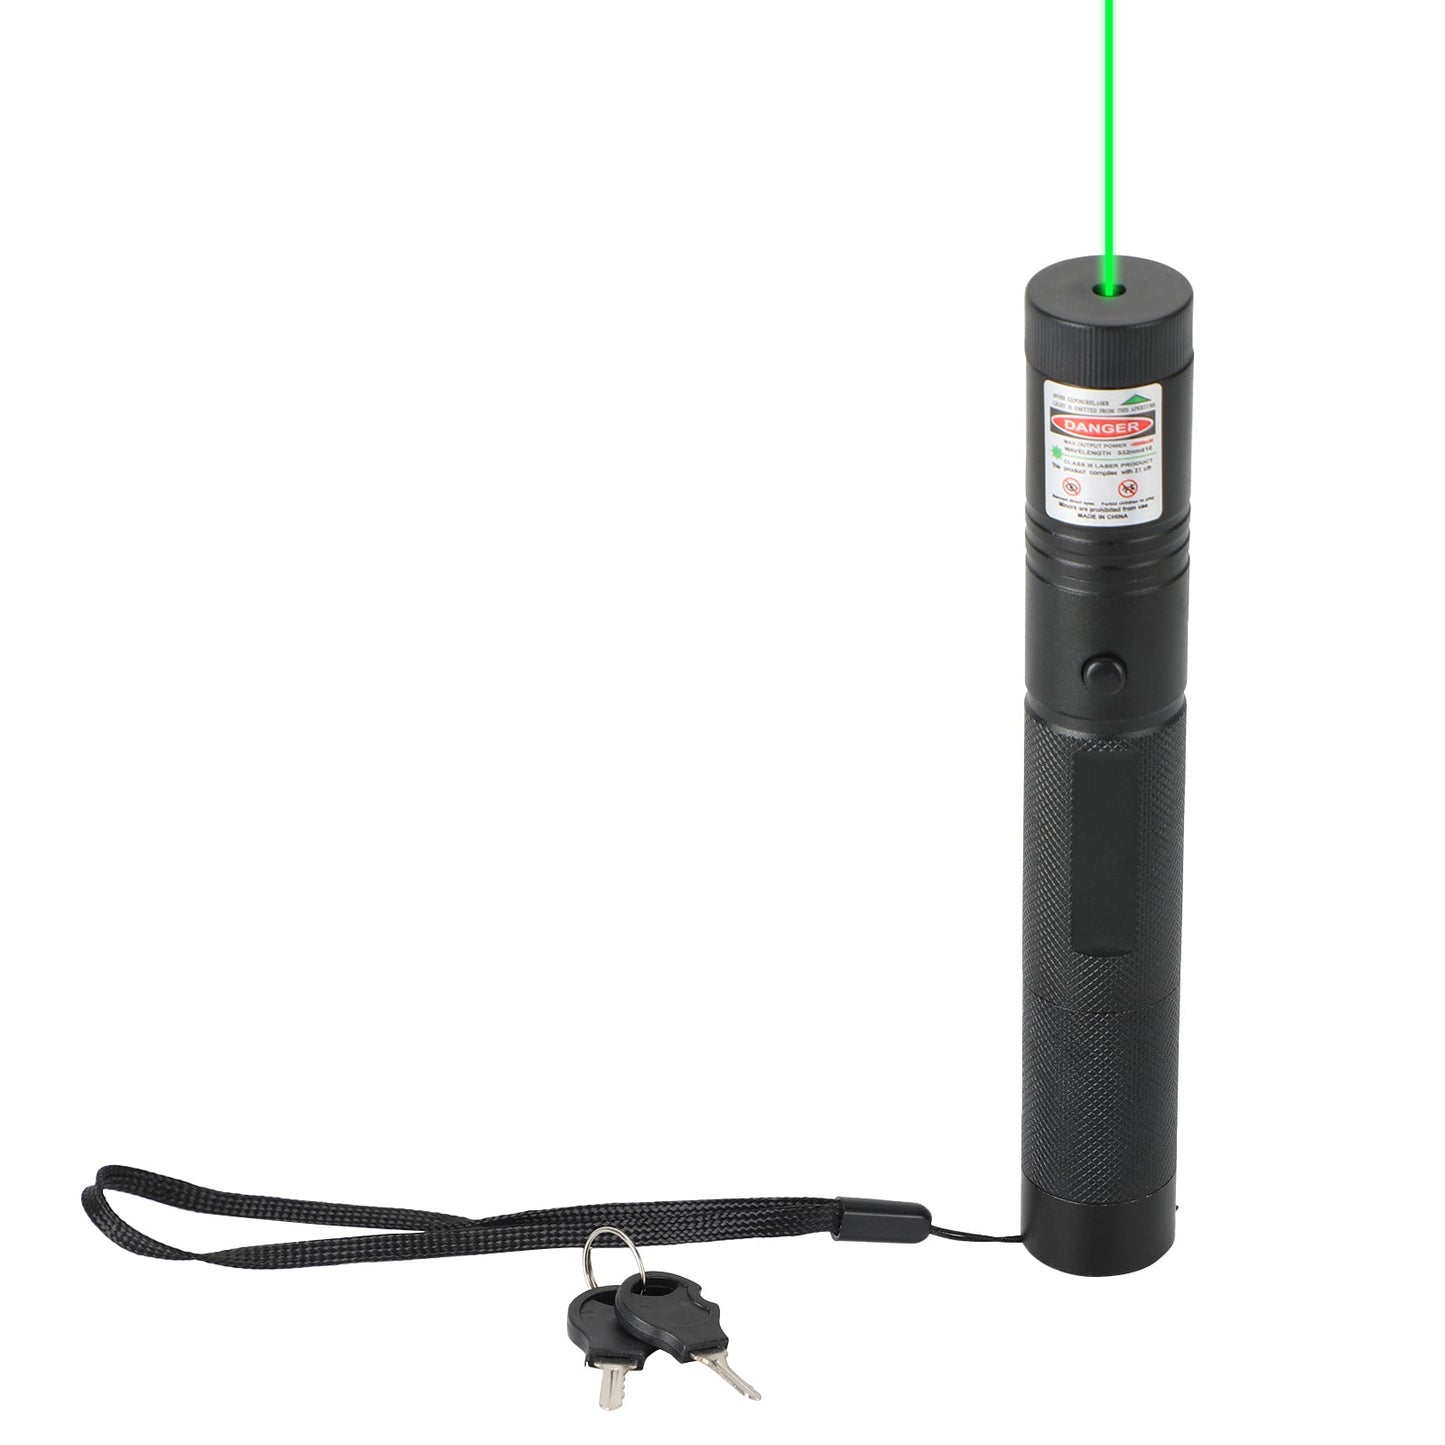 Rechargeable 900 Miles Red Laser Pointer Lazer Pen 650nm Visible Beam